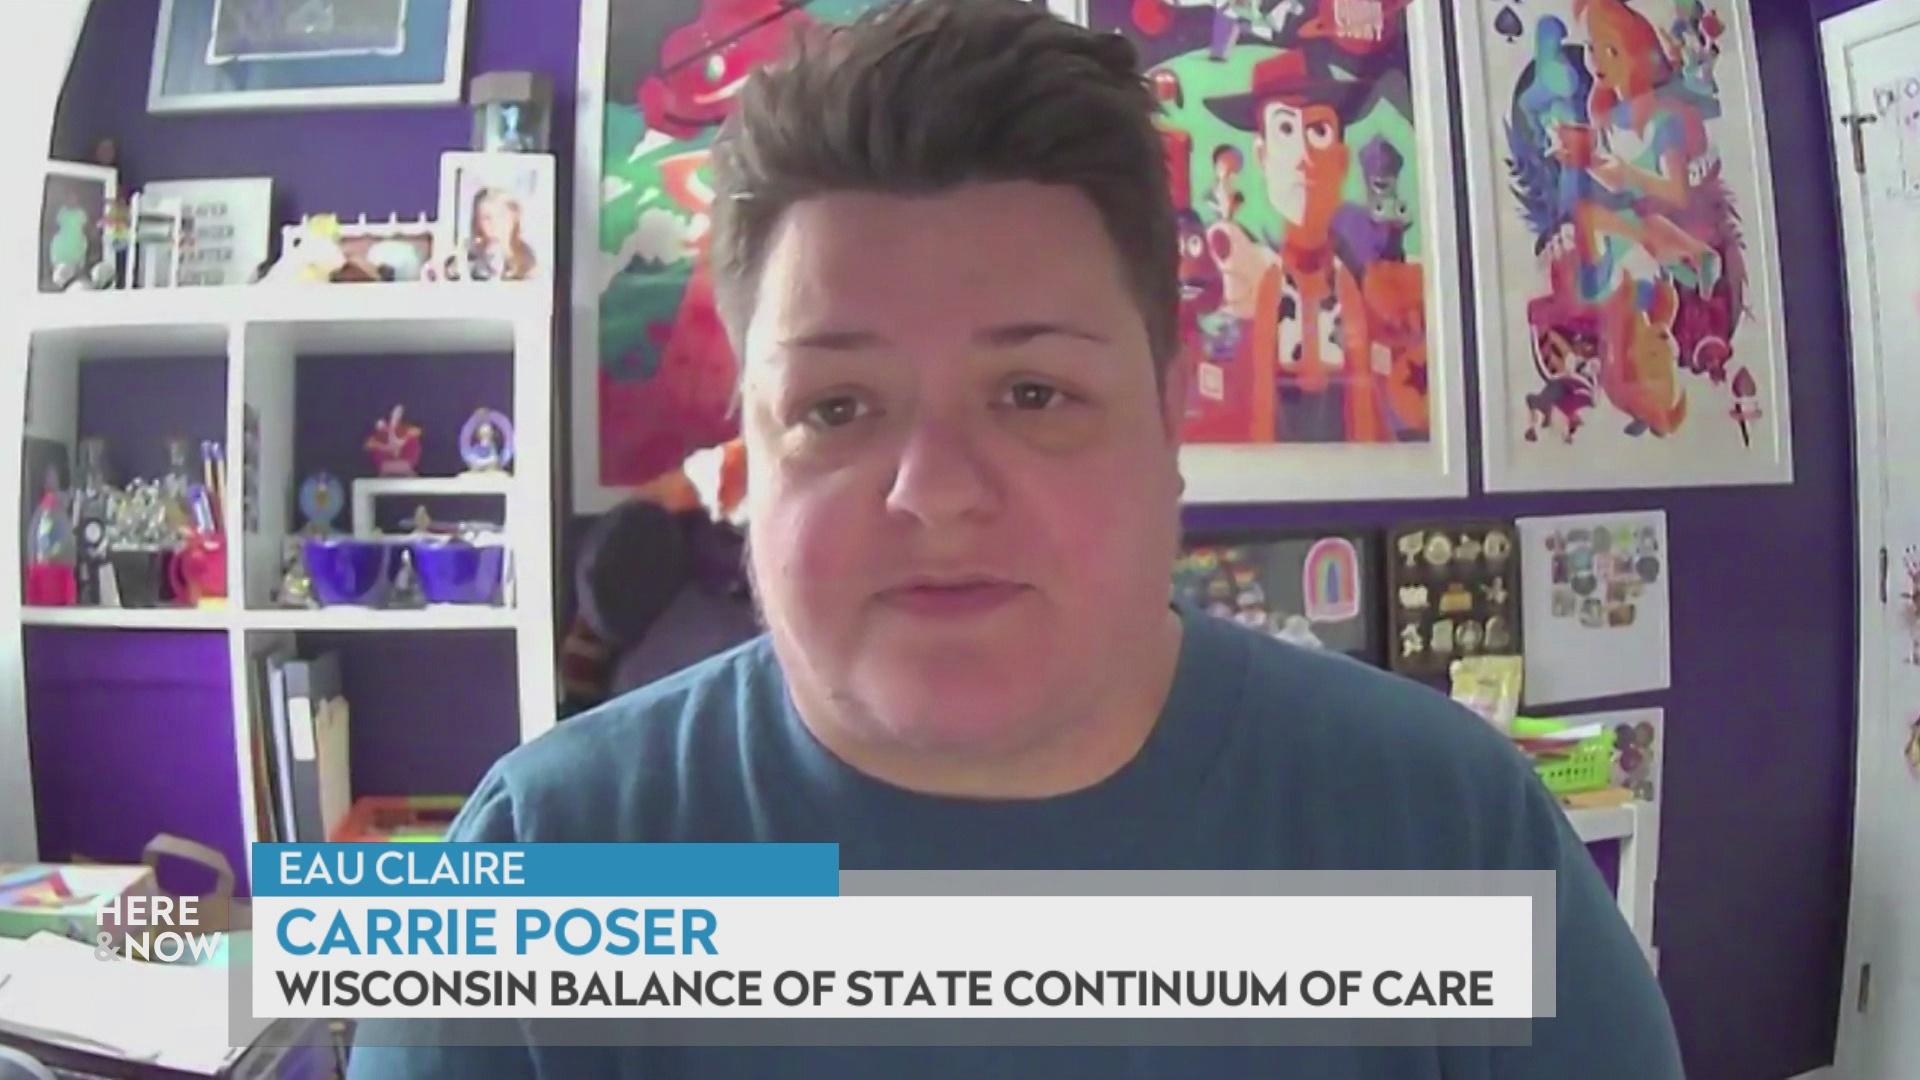 A still image from a video shows Carrie Poser seated in front of purple wall with colorful posters and white shelves lined with figures with a graphic at bottom reading 'Eau Claire,' 'Carrie Poser' and 'Wisconsin Balance of State Continuum of Cares.'